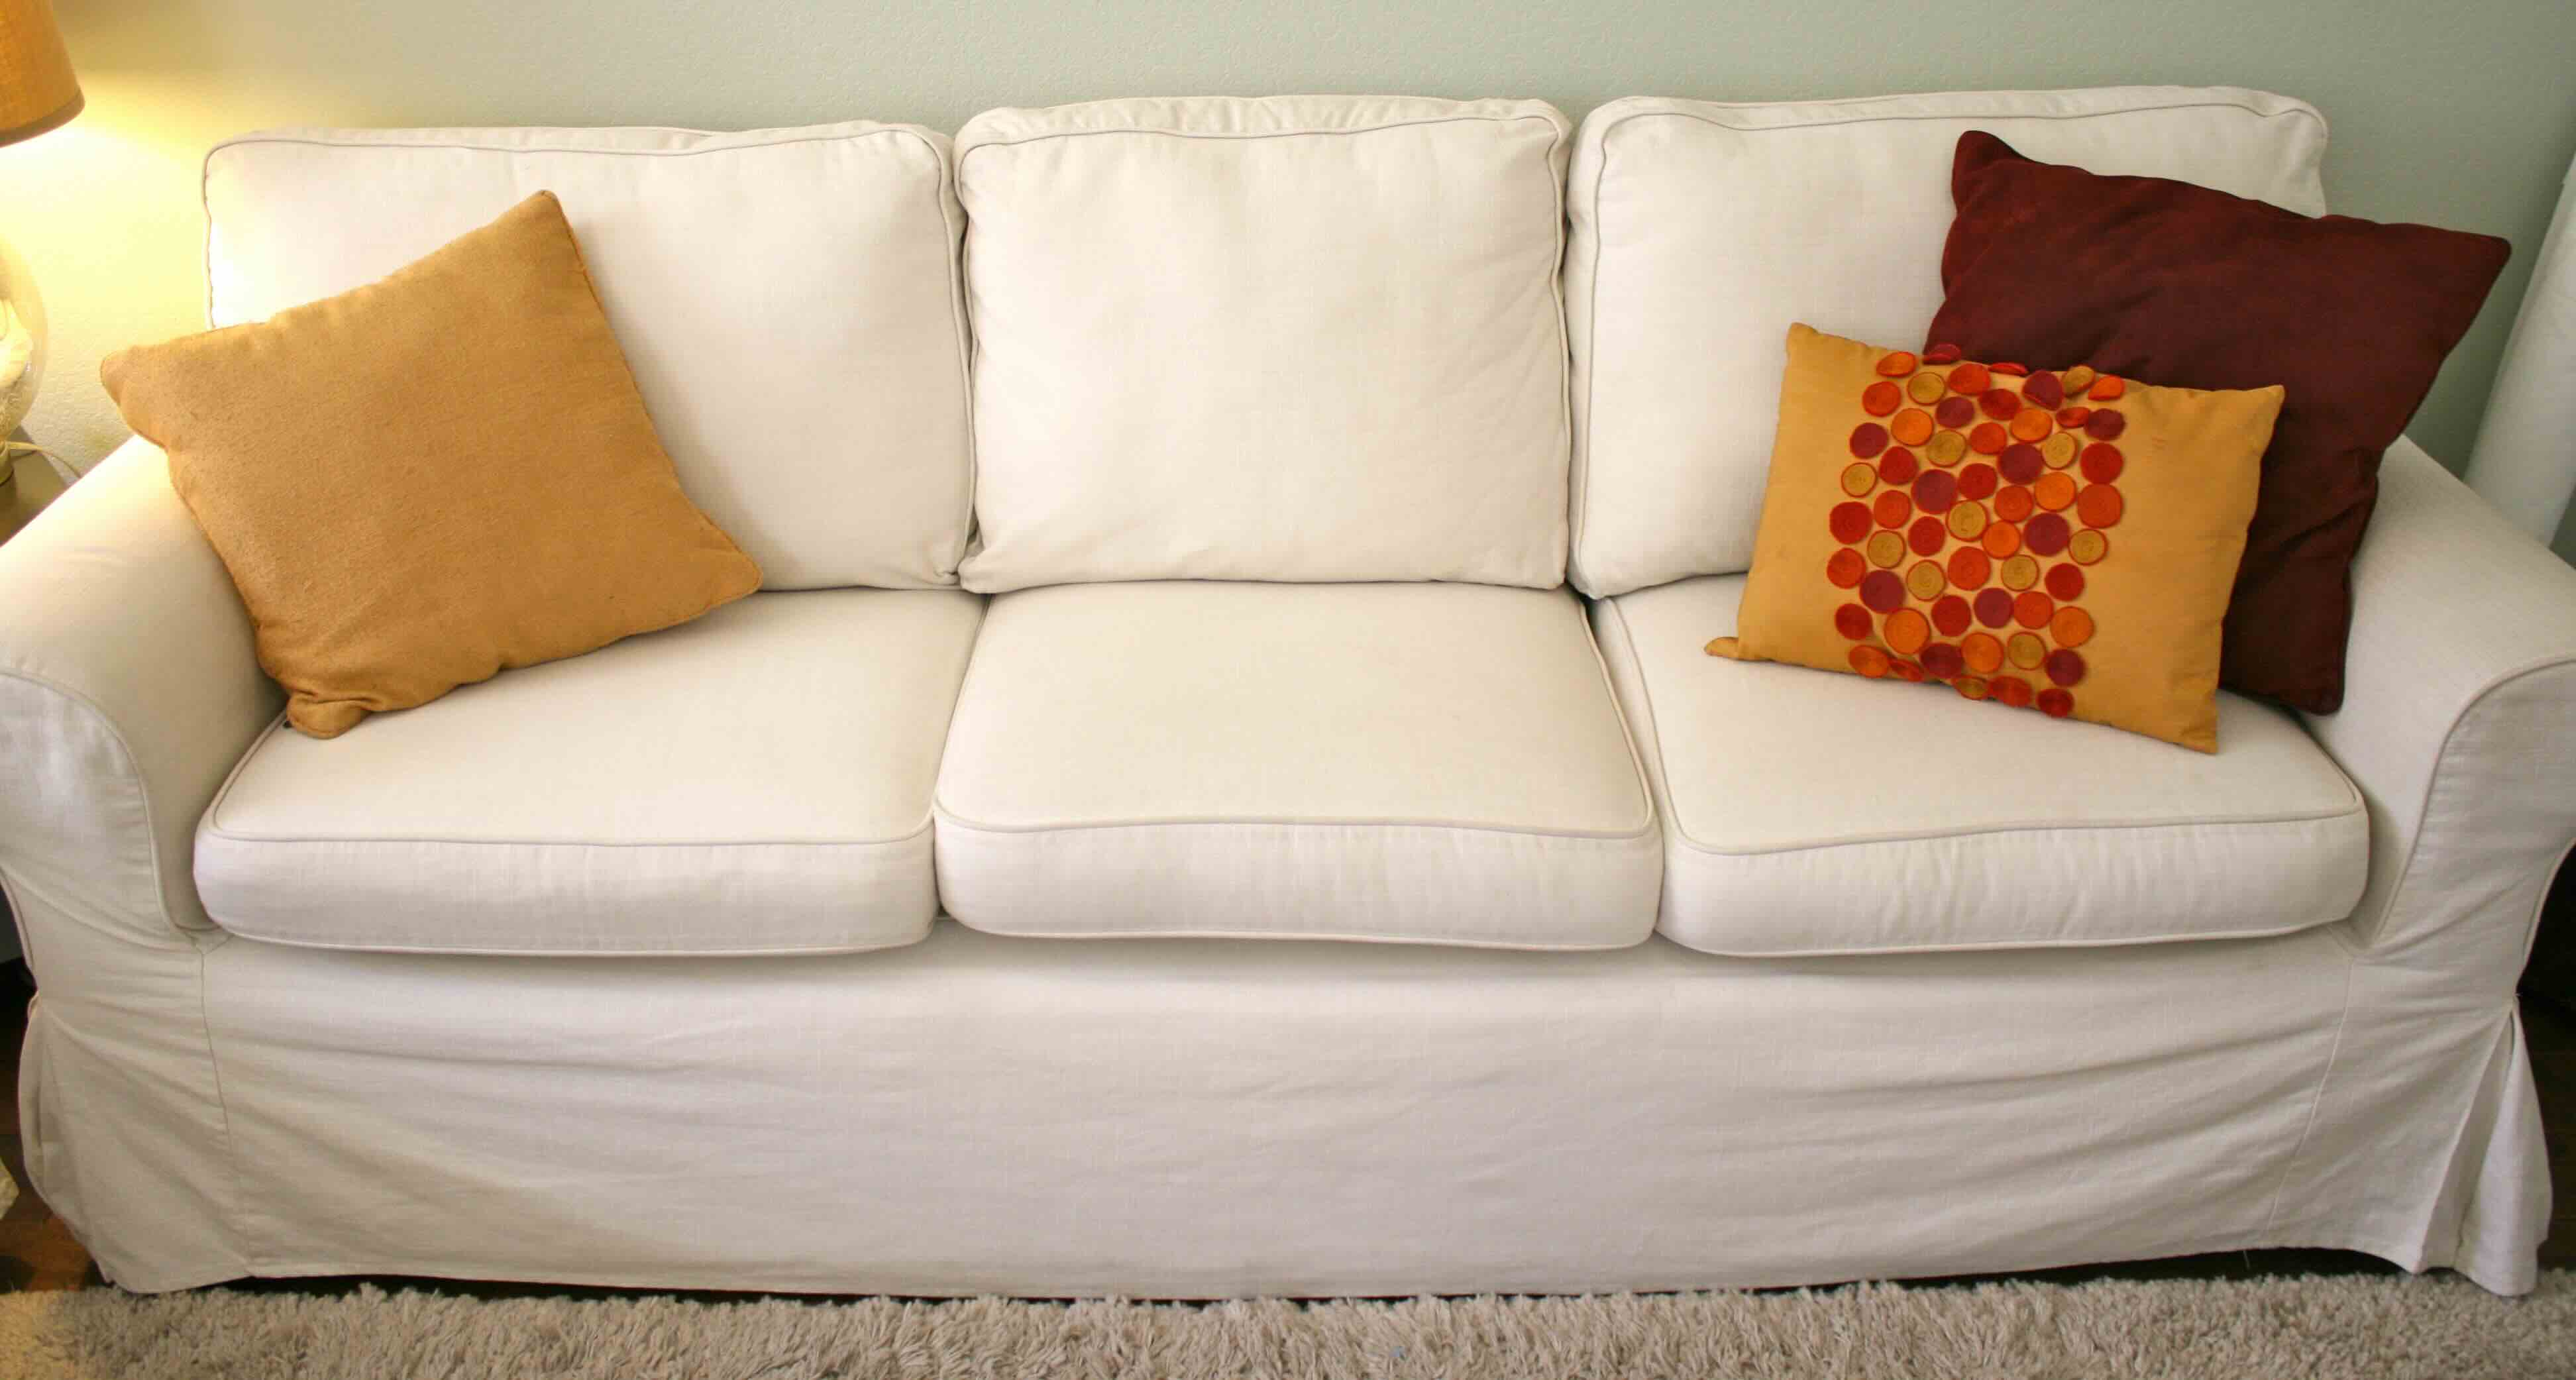 How To Make Couch Cushions Firmer